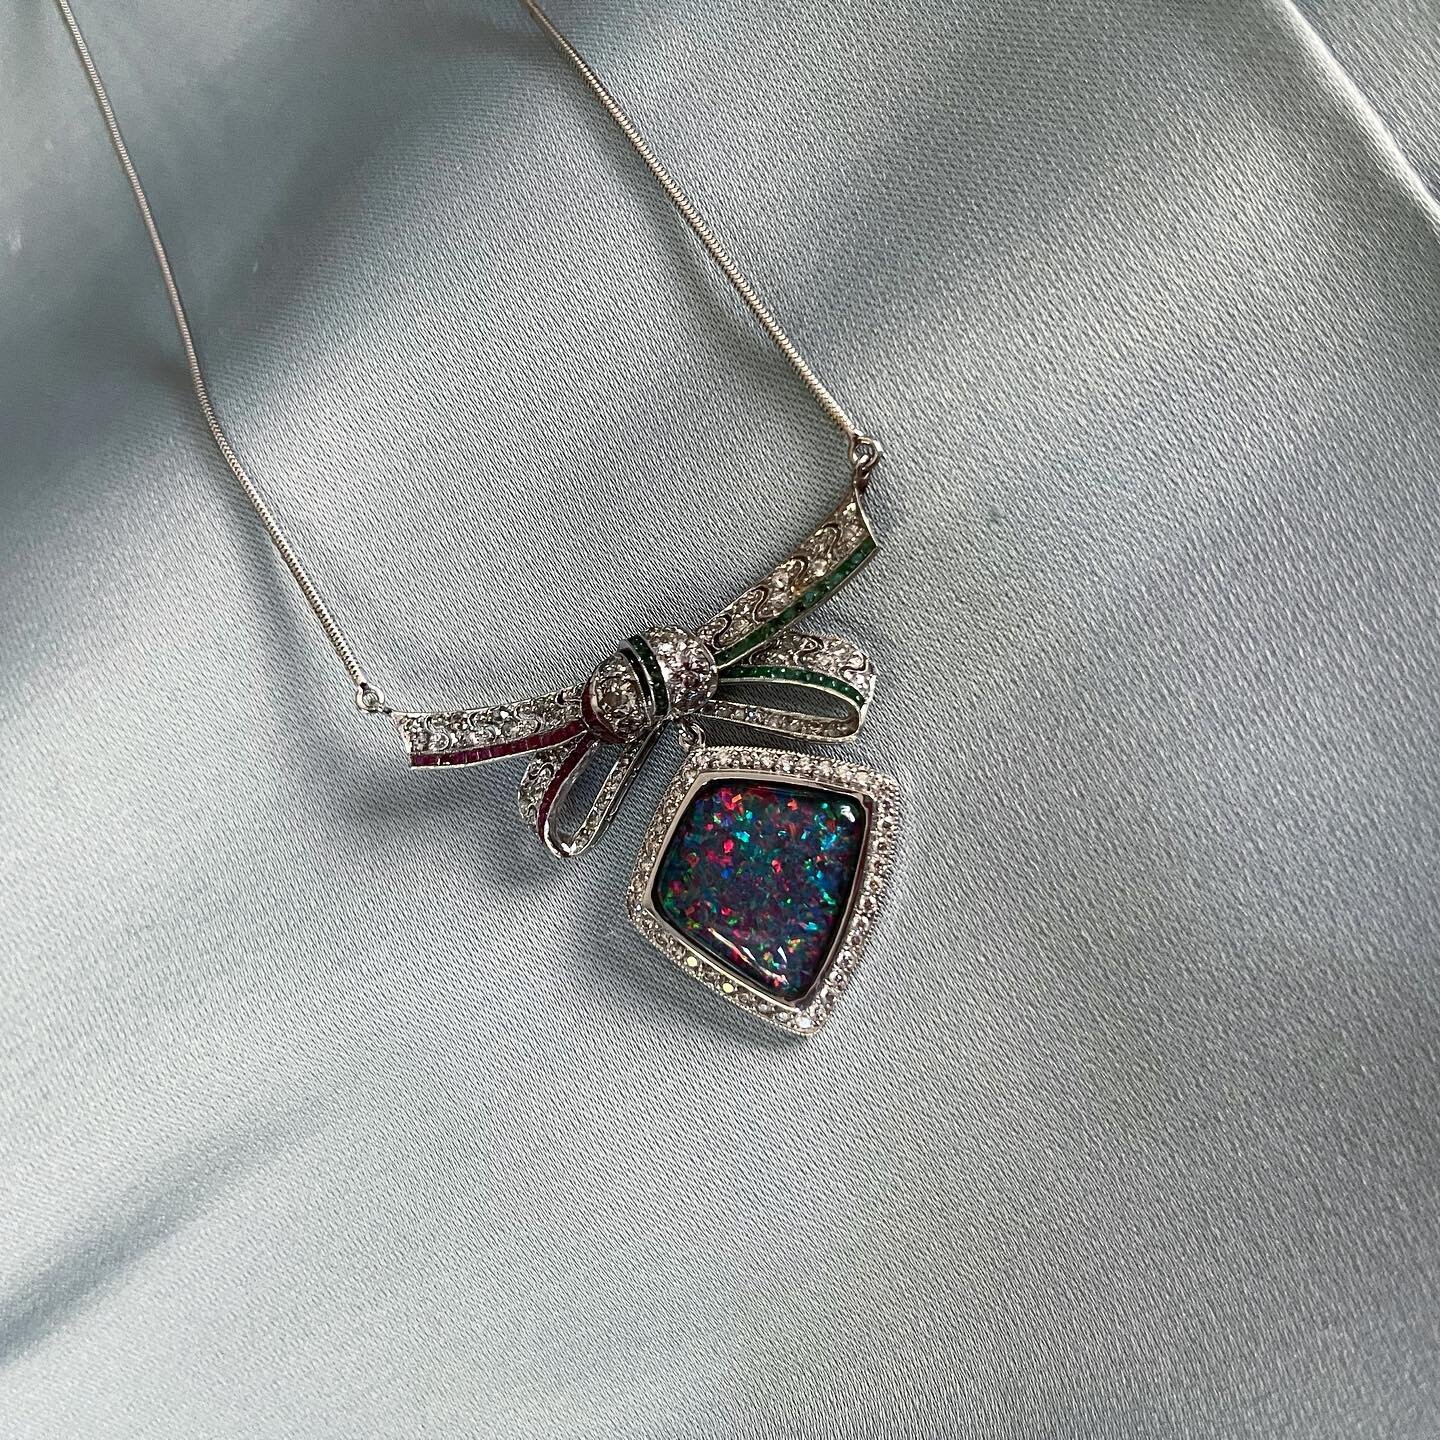 This necklace captures the beauty of an art deco diamond, sapphire, ruby, and emerald pin and bow. They now frame an extraordinary confetti opal, also entrusted in gold and diamonds to make an exquisite pendant. It is elegant, it is charming, it is h